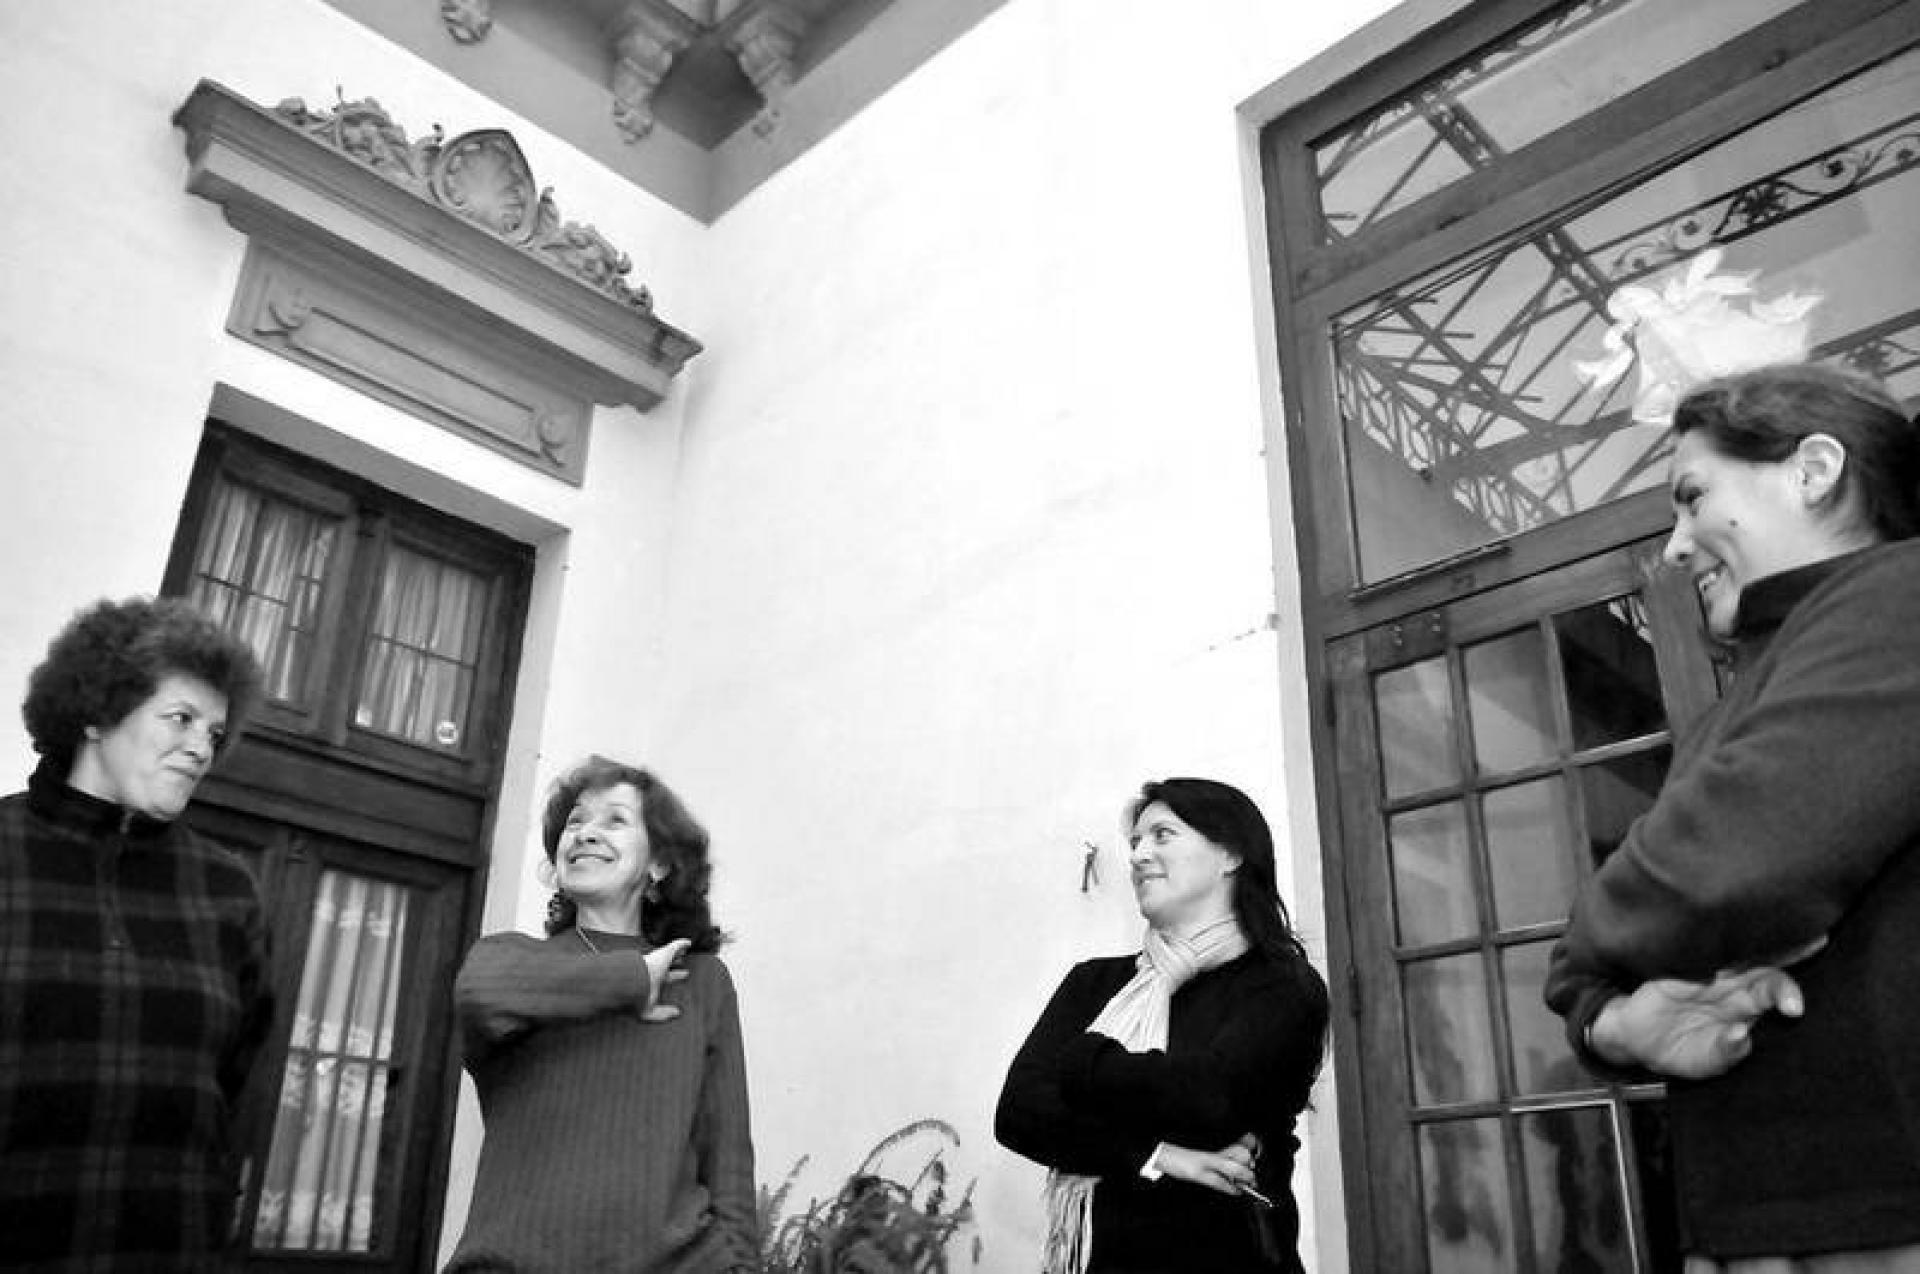 Charna Furman is a leading figure for rehabilitating Montevideo’s historic centre and an advocate of women’s rights in the city. | Photo via Un dia uno arquitecta